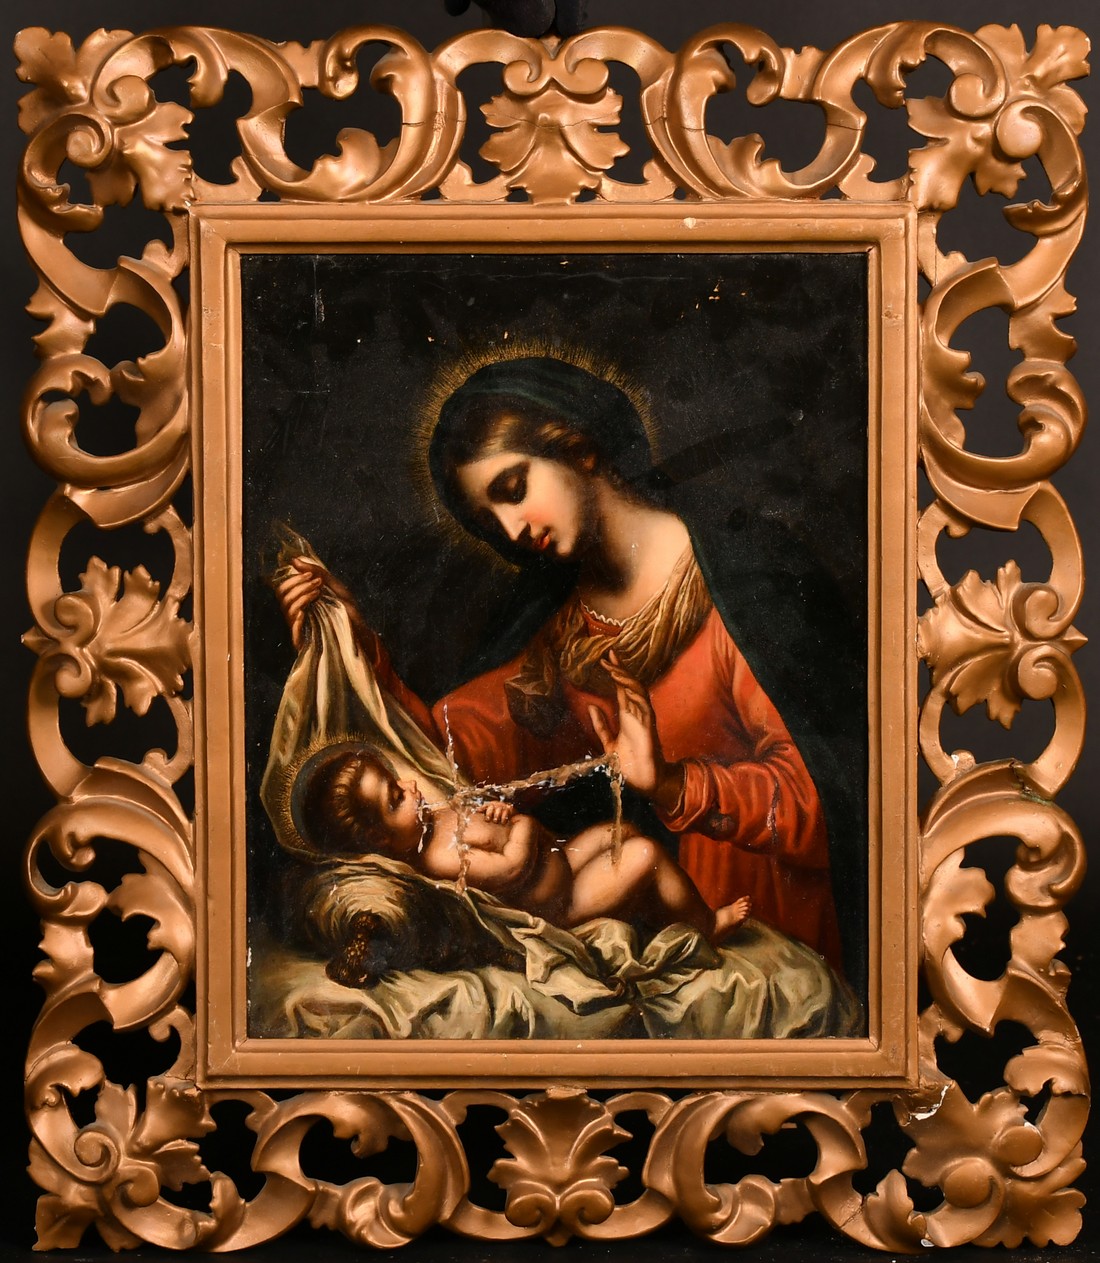 19th Century Italian School, Madonna and Child, oil on canvas, in a Florentine Carved frame, 12" x - Image 2 of 3